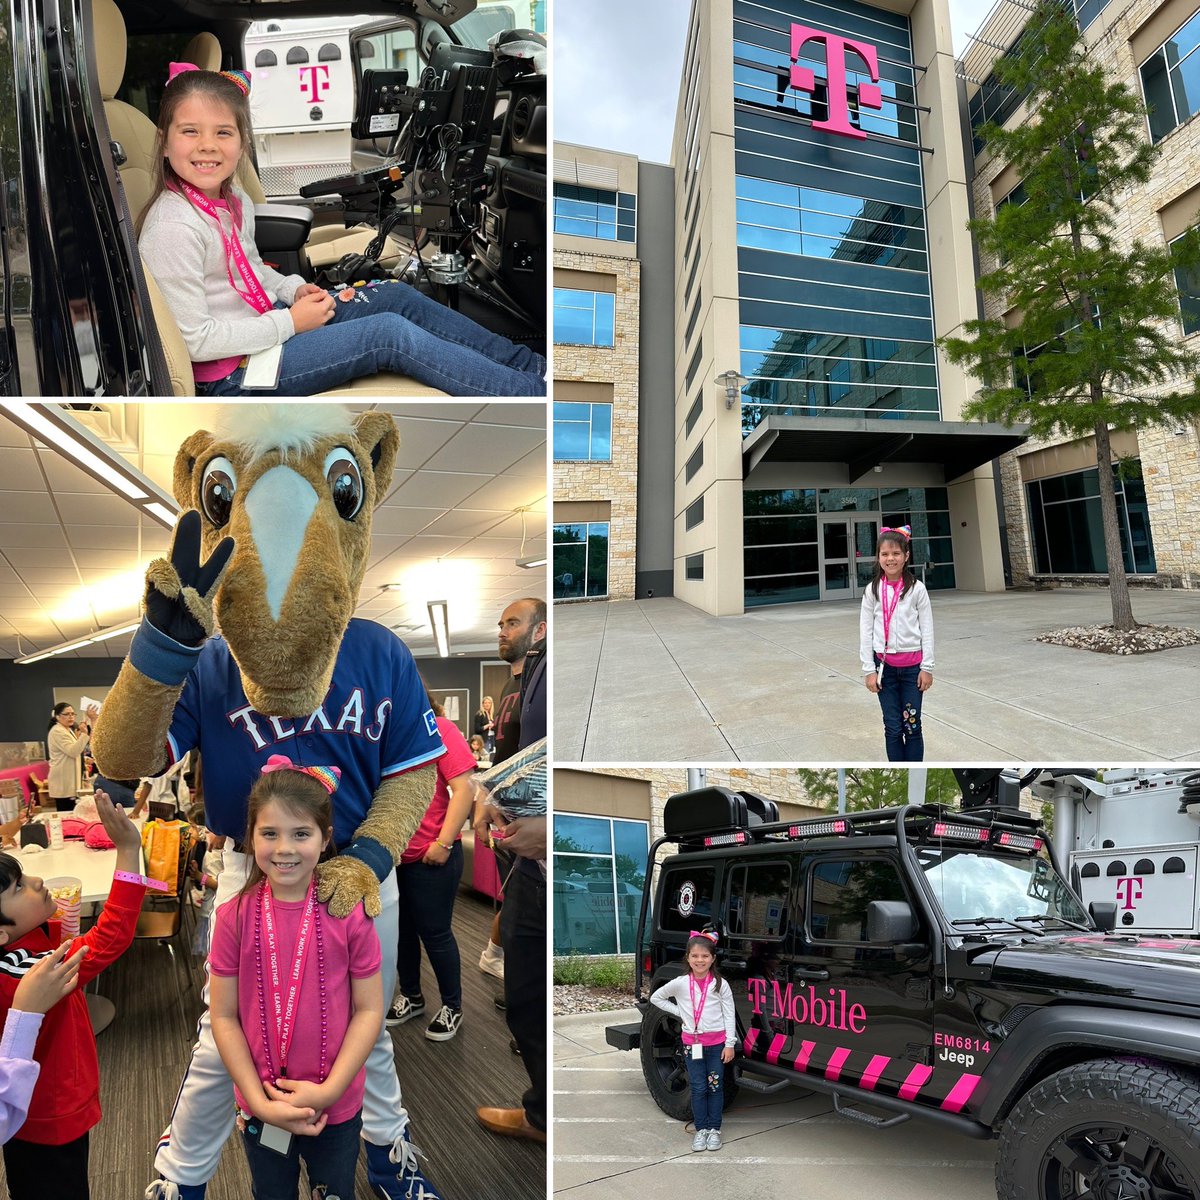 Bring Your Kid to Work Day was a big success in Frisco, TX! So thankful for @TMobile and all of our teams that made this event so great for our next generation!